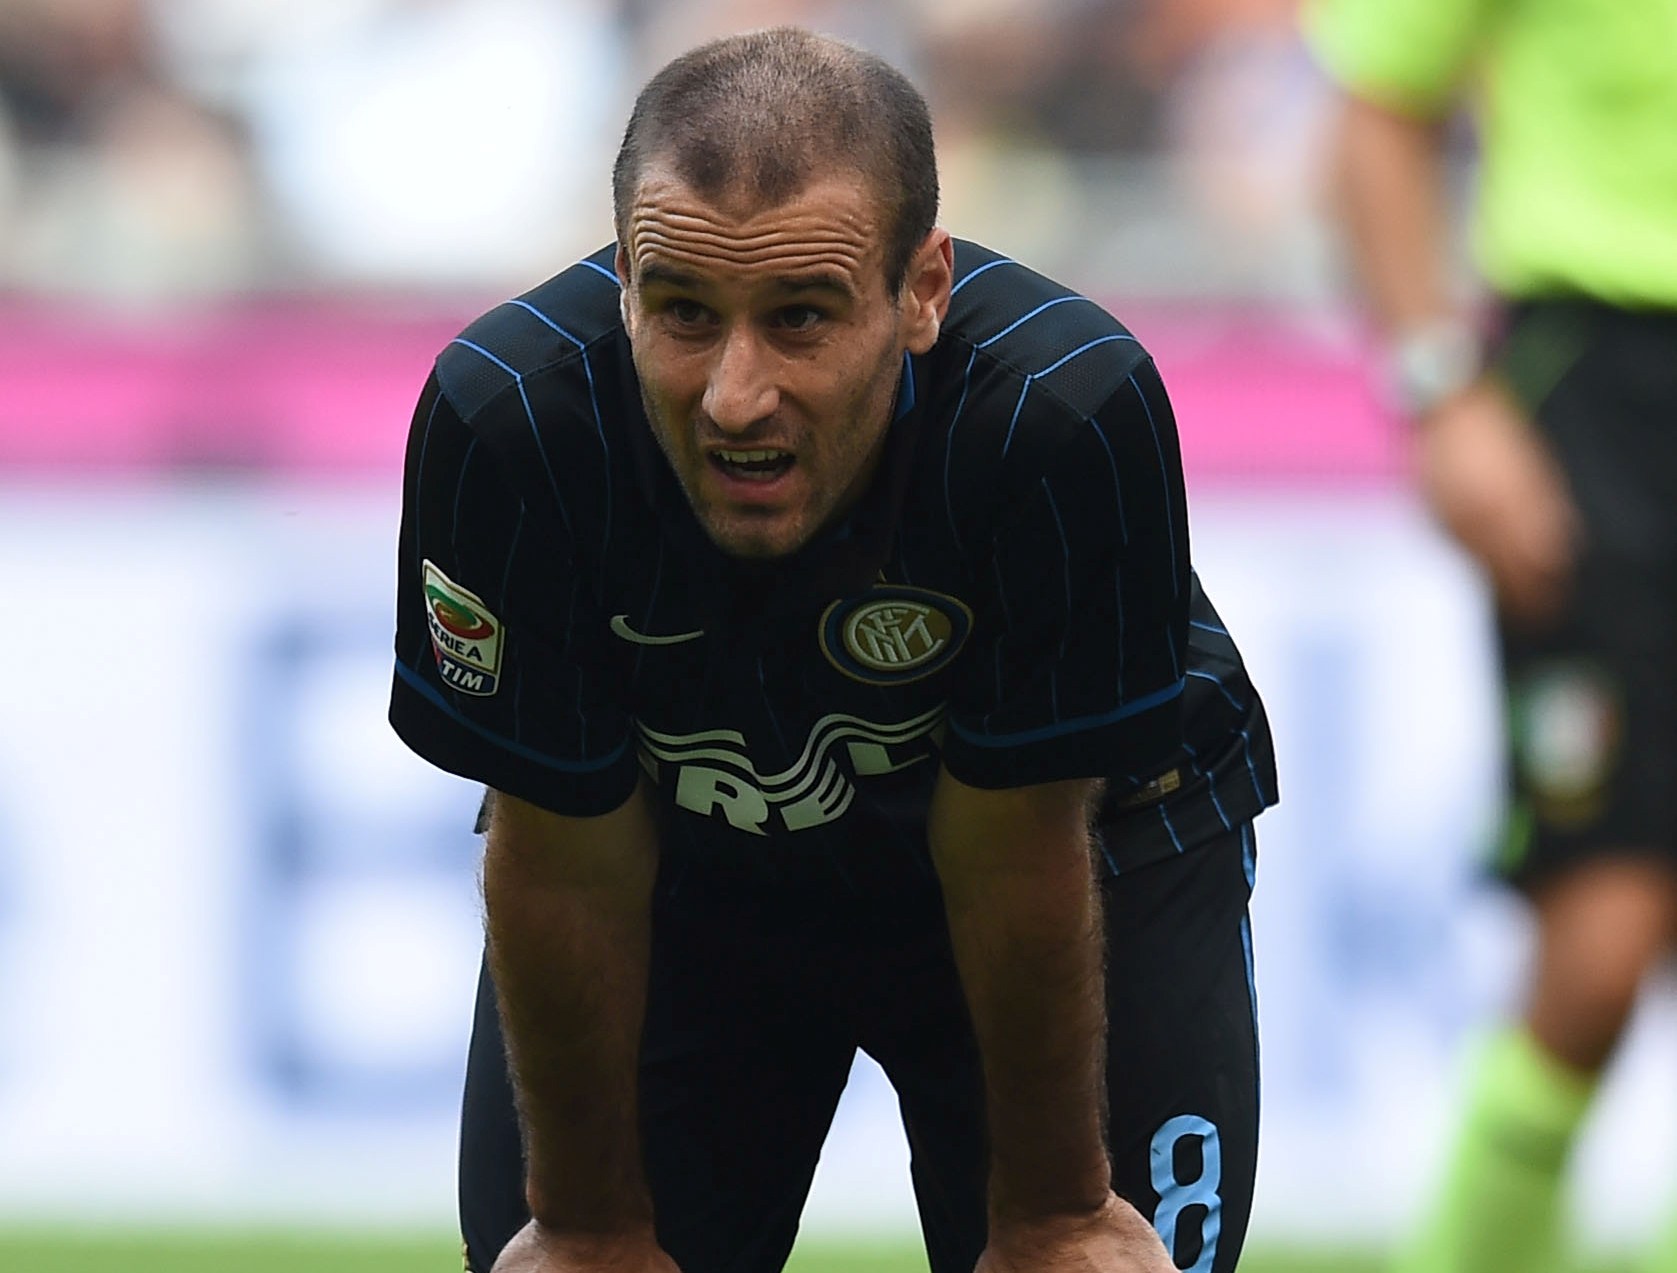 Palacio to IC: “The goals? I’m not worried”